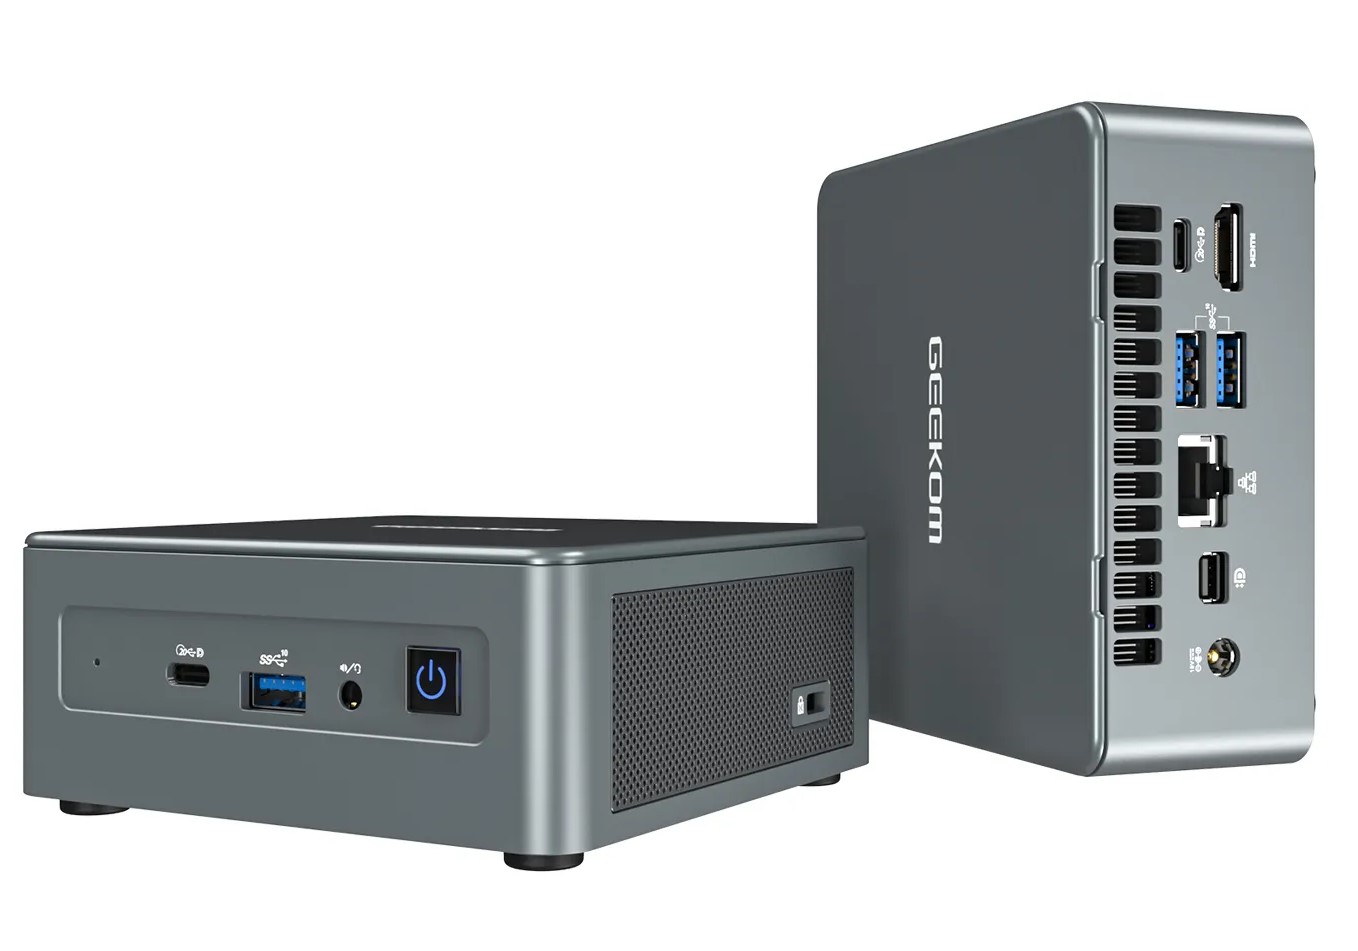 Geekom's Mini IT13 delivers a mighty Core i9 in a tiny 4x4 form factor mini  PC